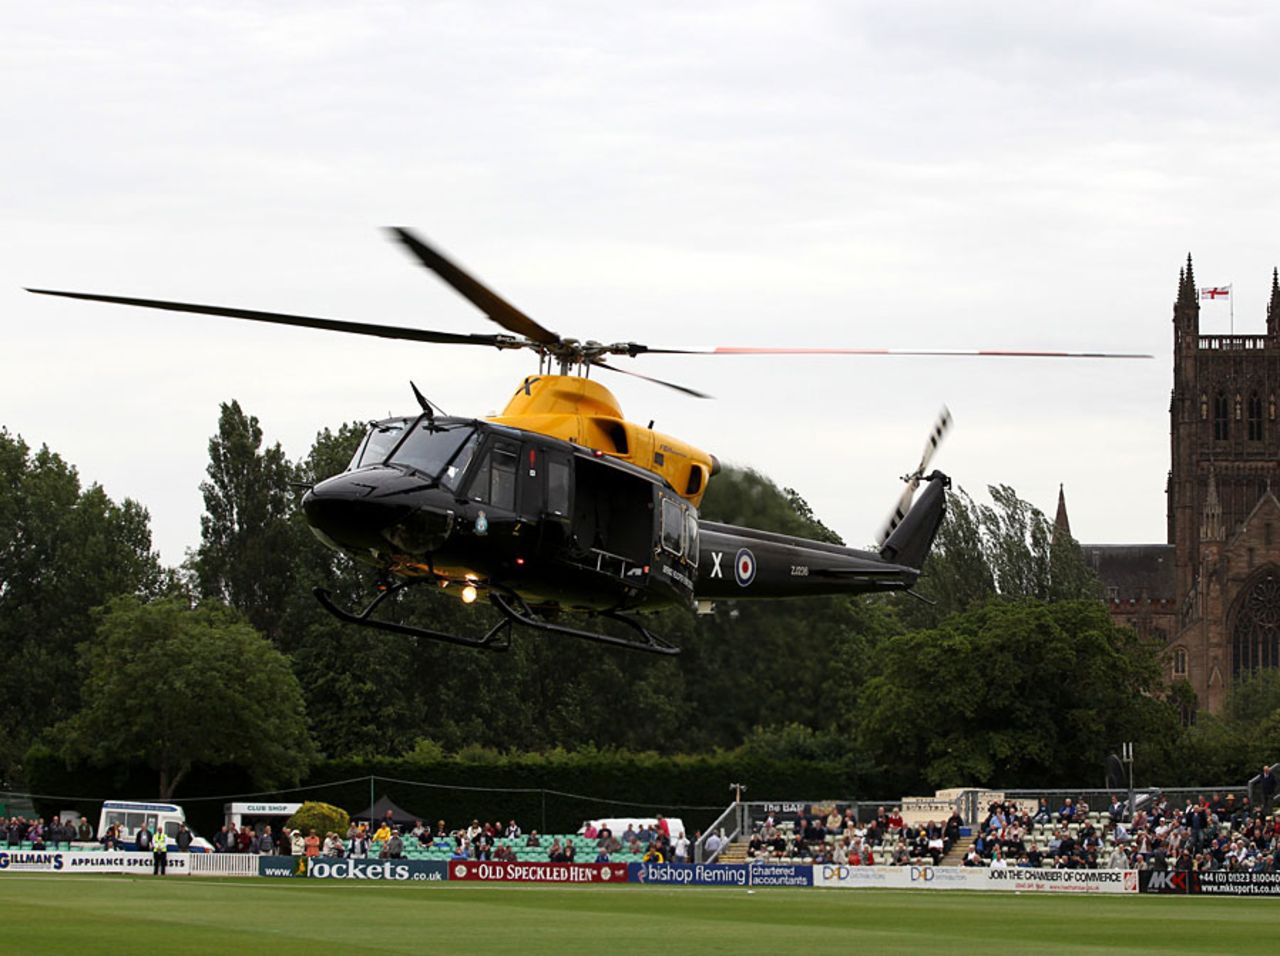 An RAF helicopter lands on the New Road outfield, Worcestershire v Australians, Tour Match, New Road, 1st day, July 2, 2013